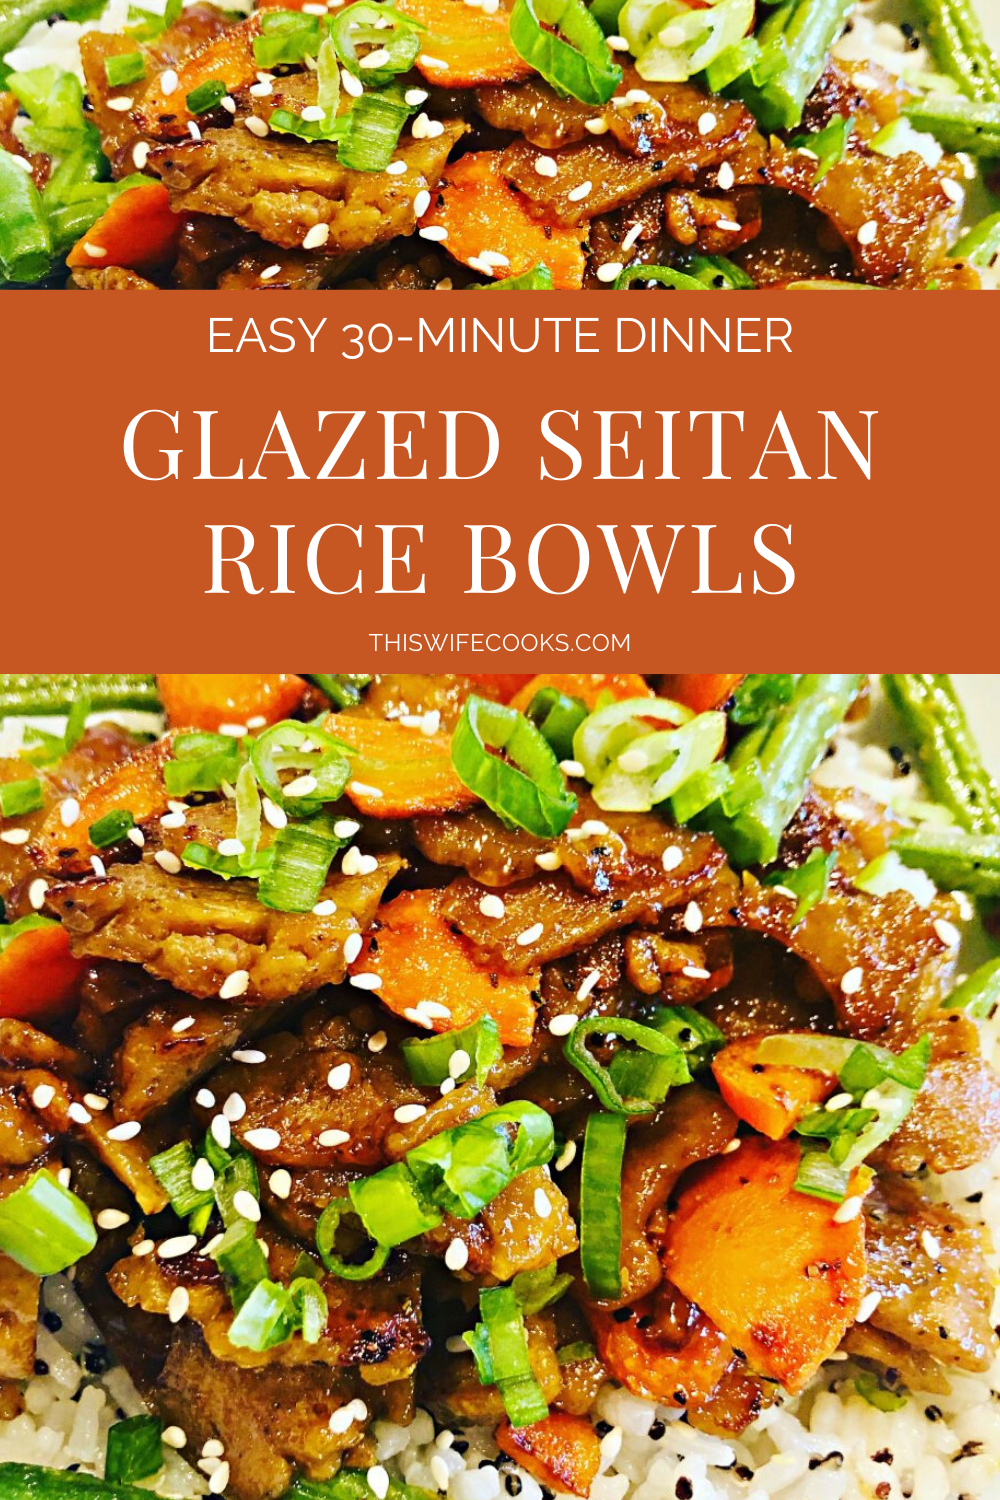 Apricot Glazed Seitan Rice Bowls - An easy and flavorful plant-based dinner that you can have on the table in about 30 minutes!

#seitanrecipes #vegandinnereasy #vegatarianricebowl #thiswifecooksrecipes #easydinnerrecipes #veganricebowl via @thiswifecooks